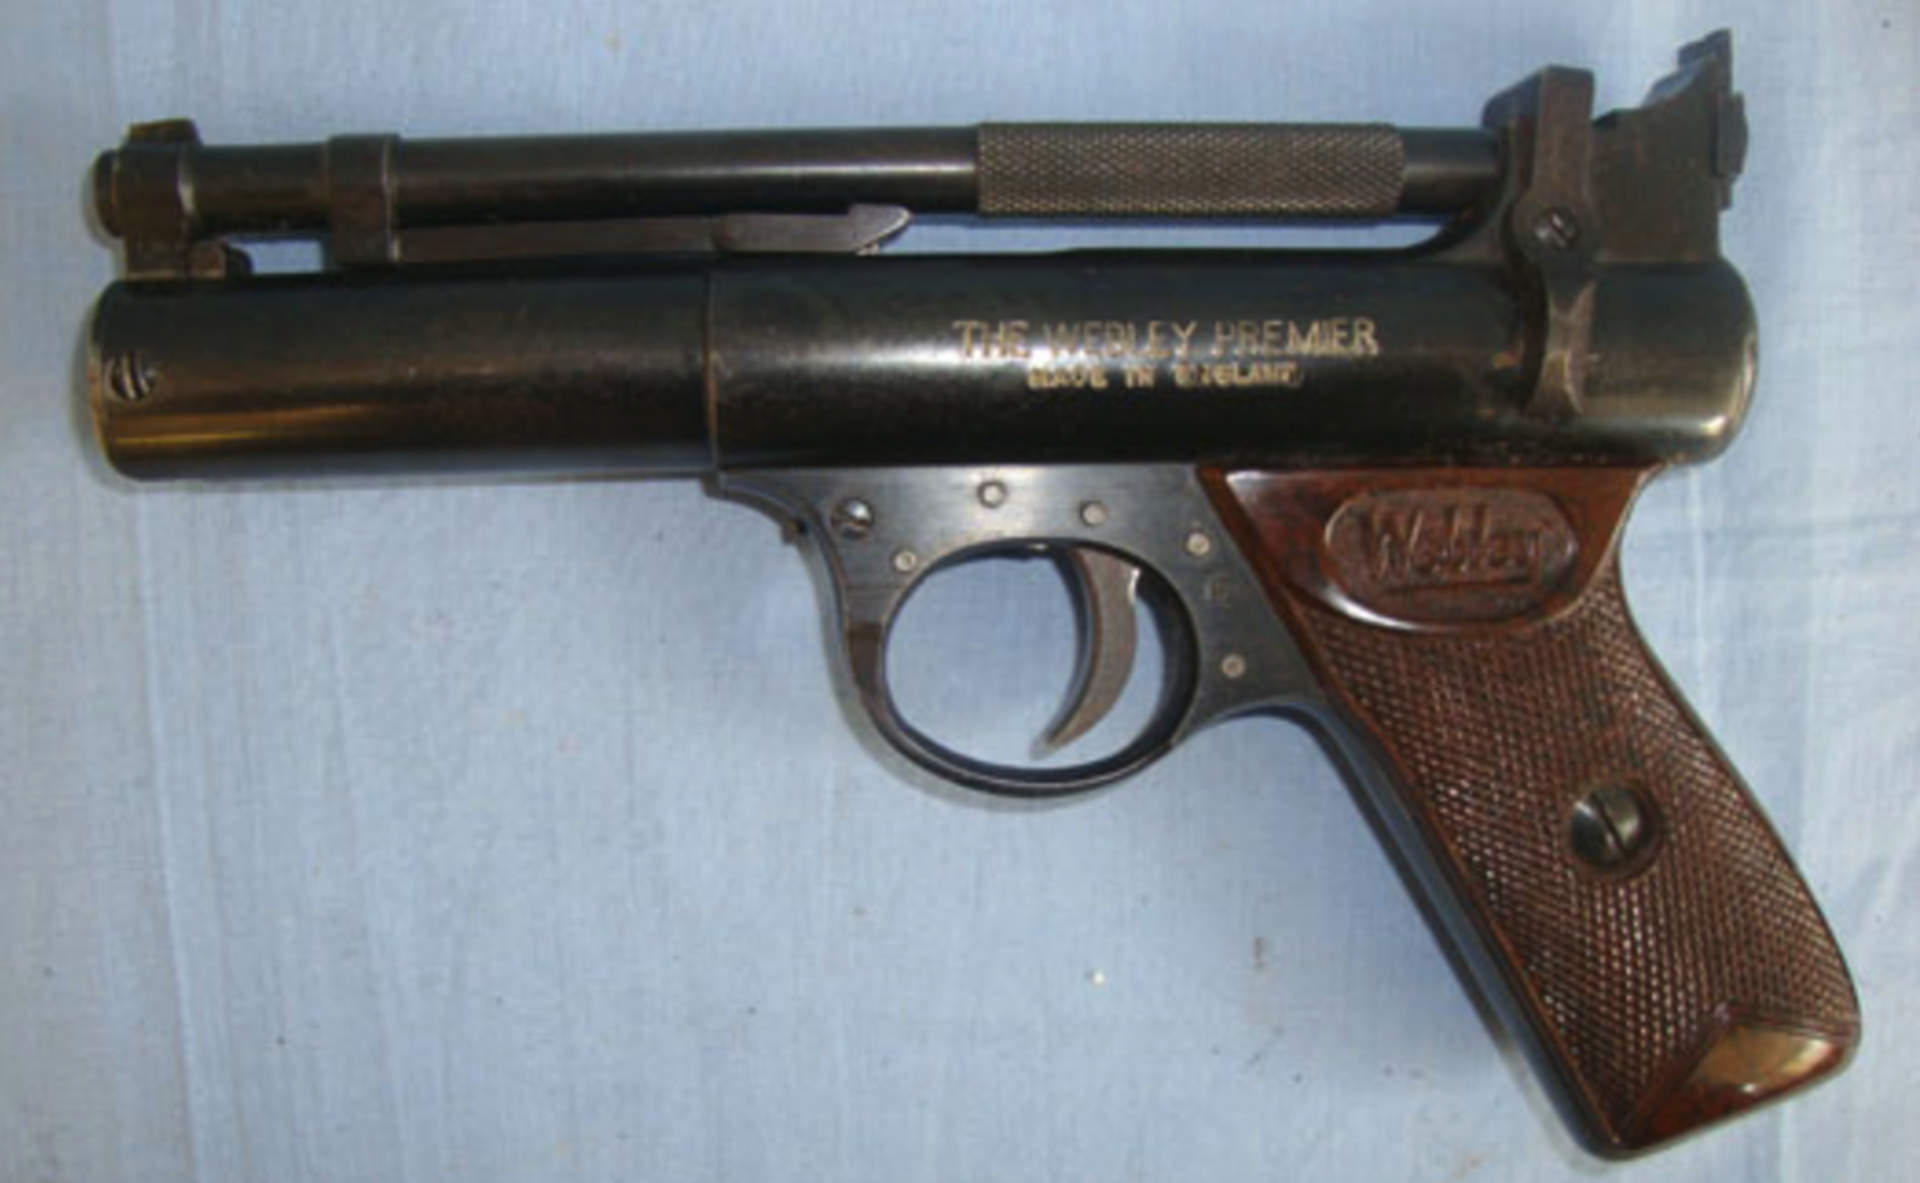 Early 1970's Webley Premier 'E' Series .22 Calibre Air Pistol With Brown Grips - Image 2 of 3